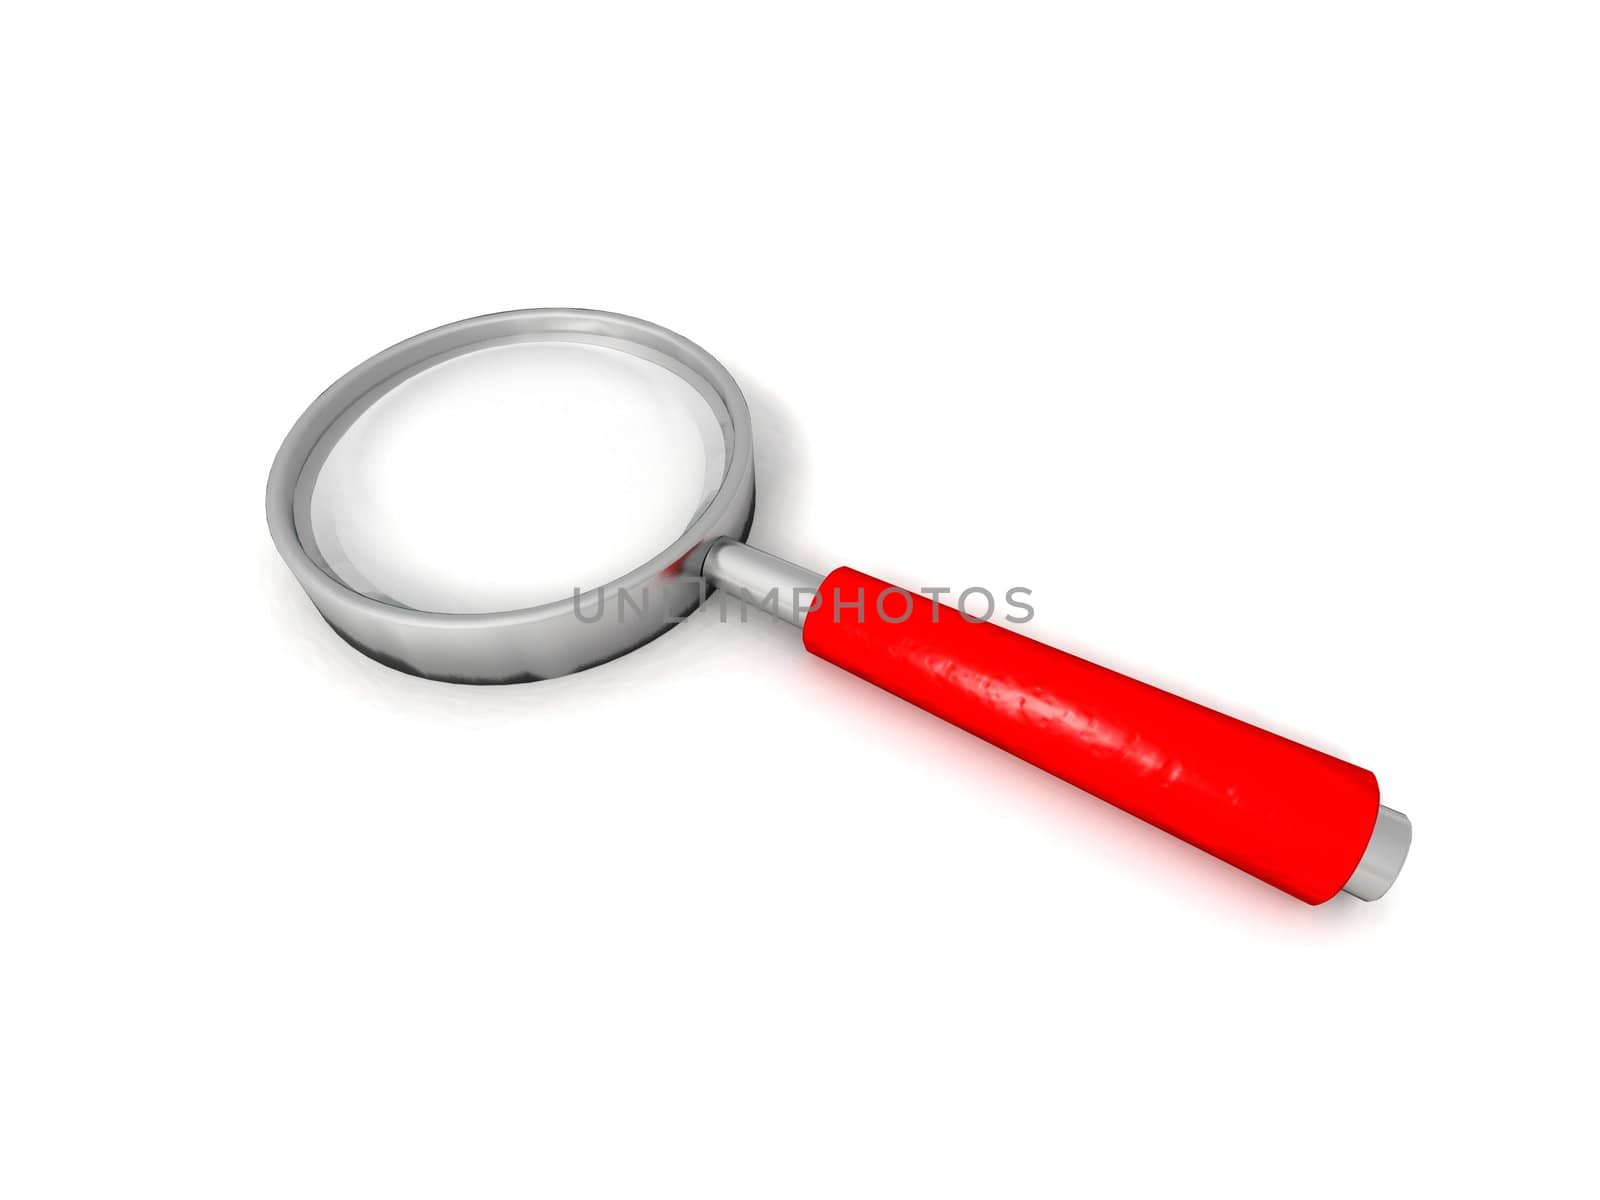 3D render of a magnifying glass on white background